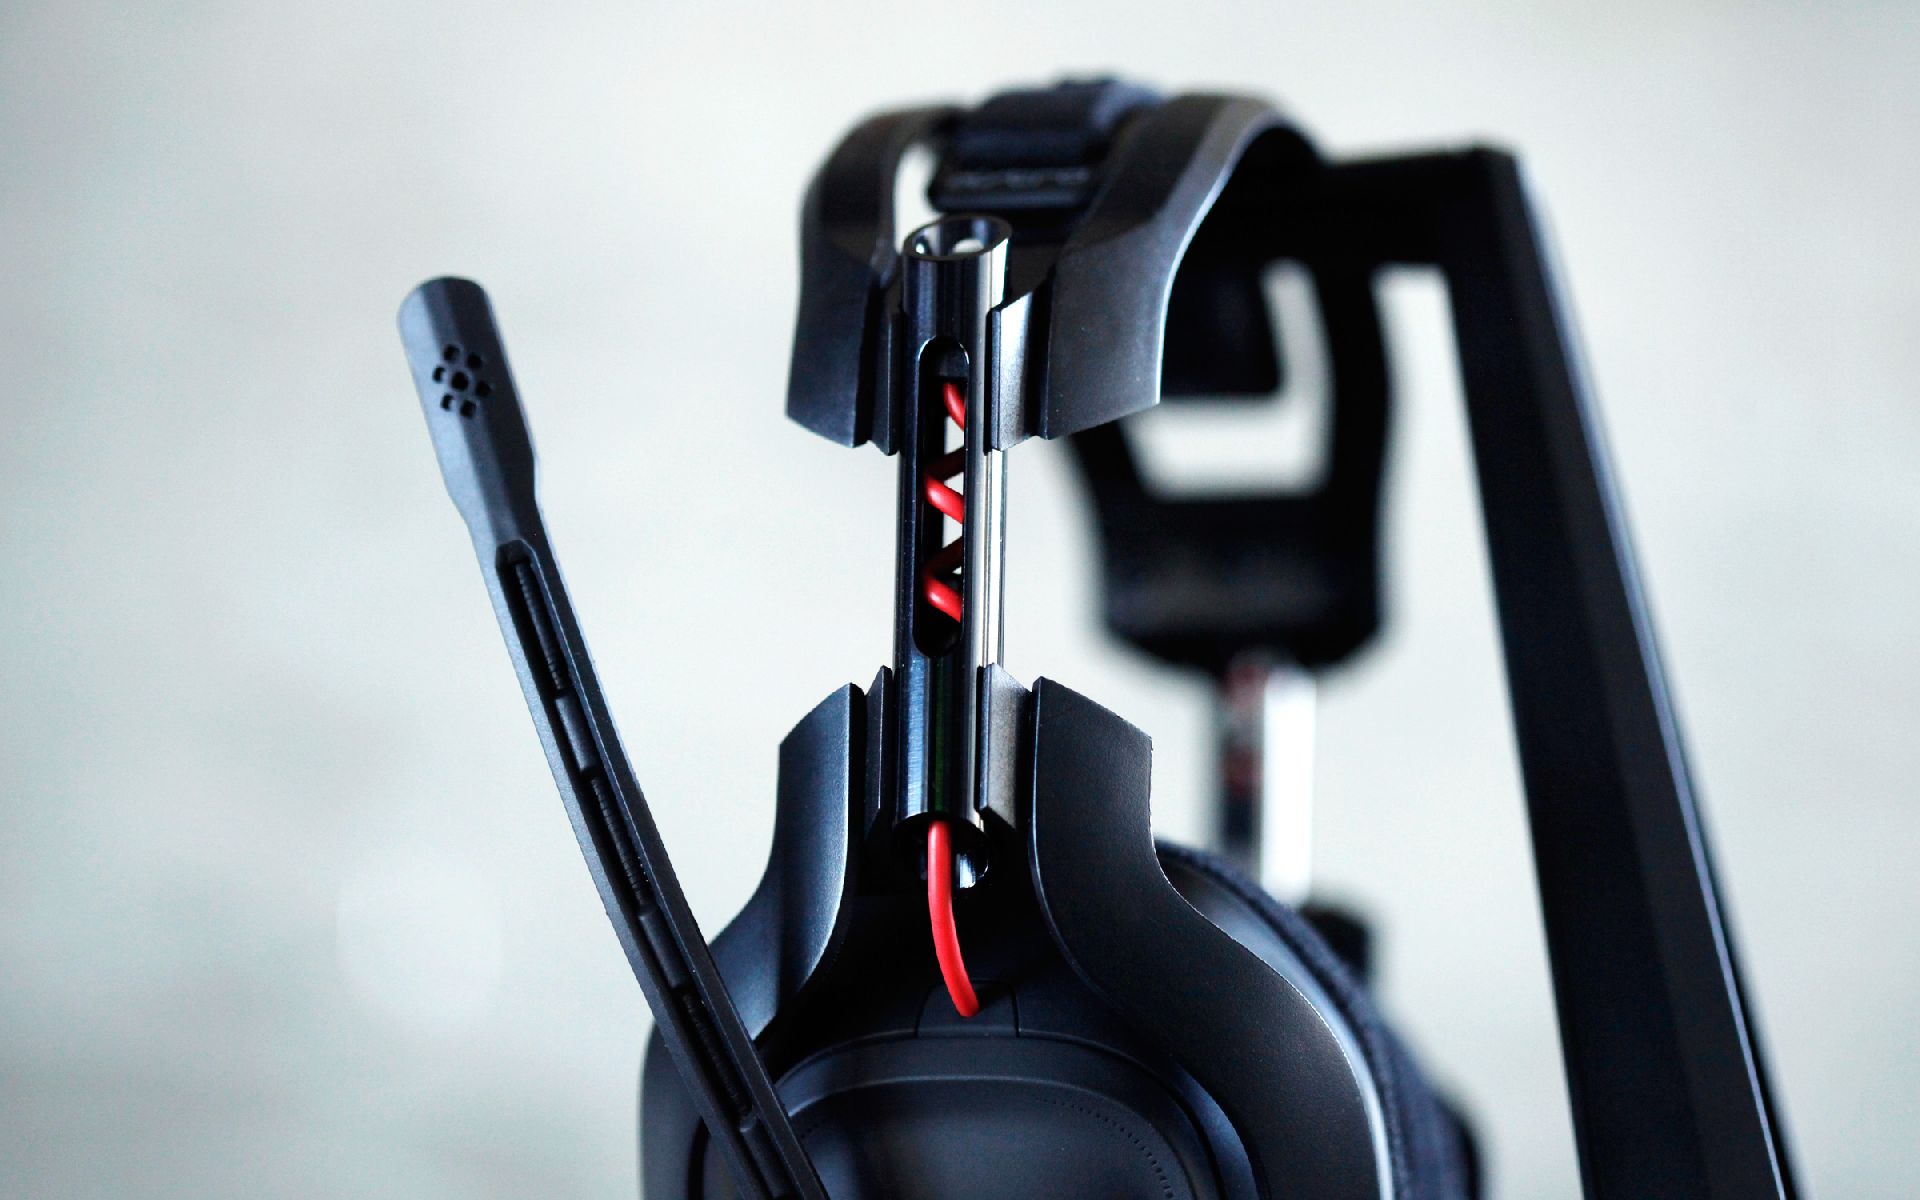 Astro Gaming Wallpaper Astro a50 wireless gaming 1920x1200